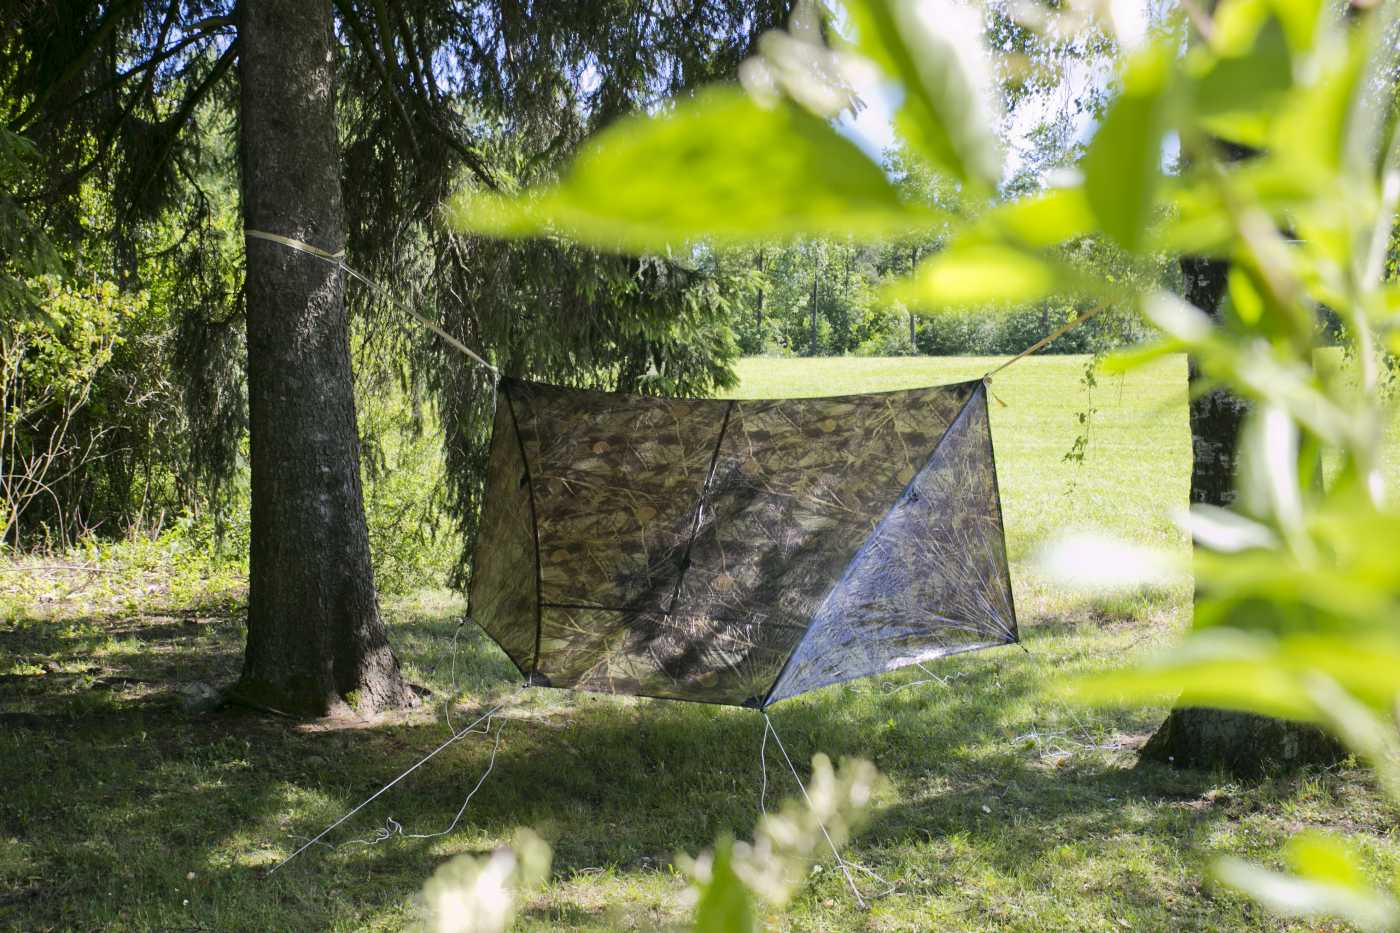 The 90 Degree Tarp-Tent is available in camo, too